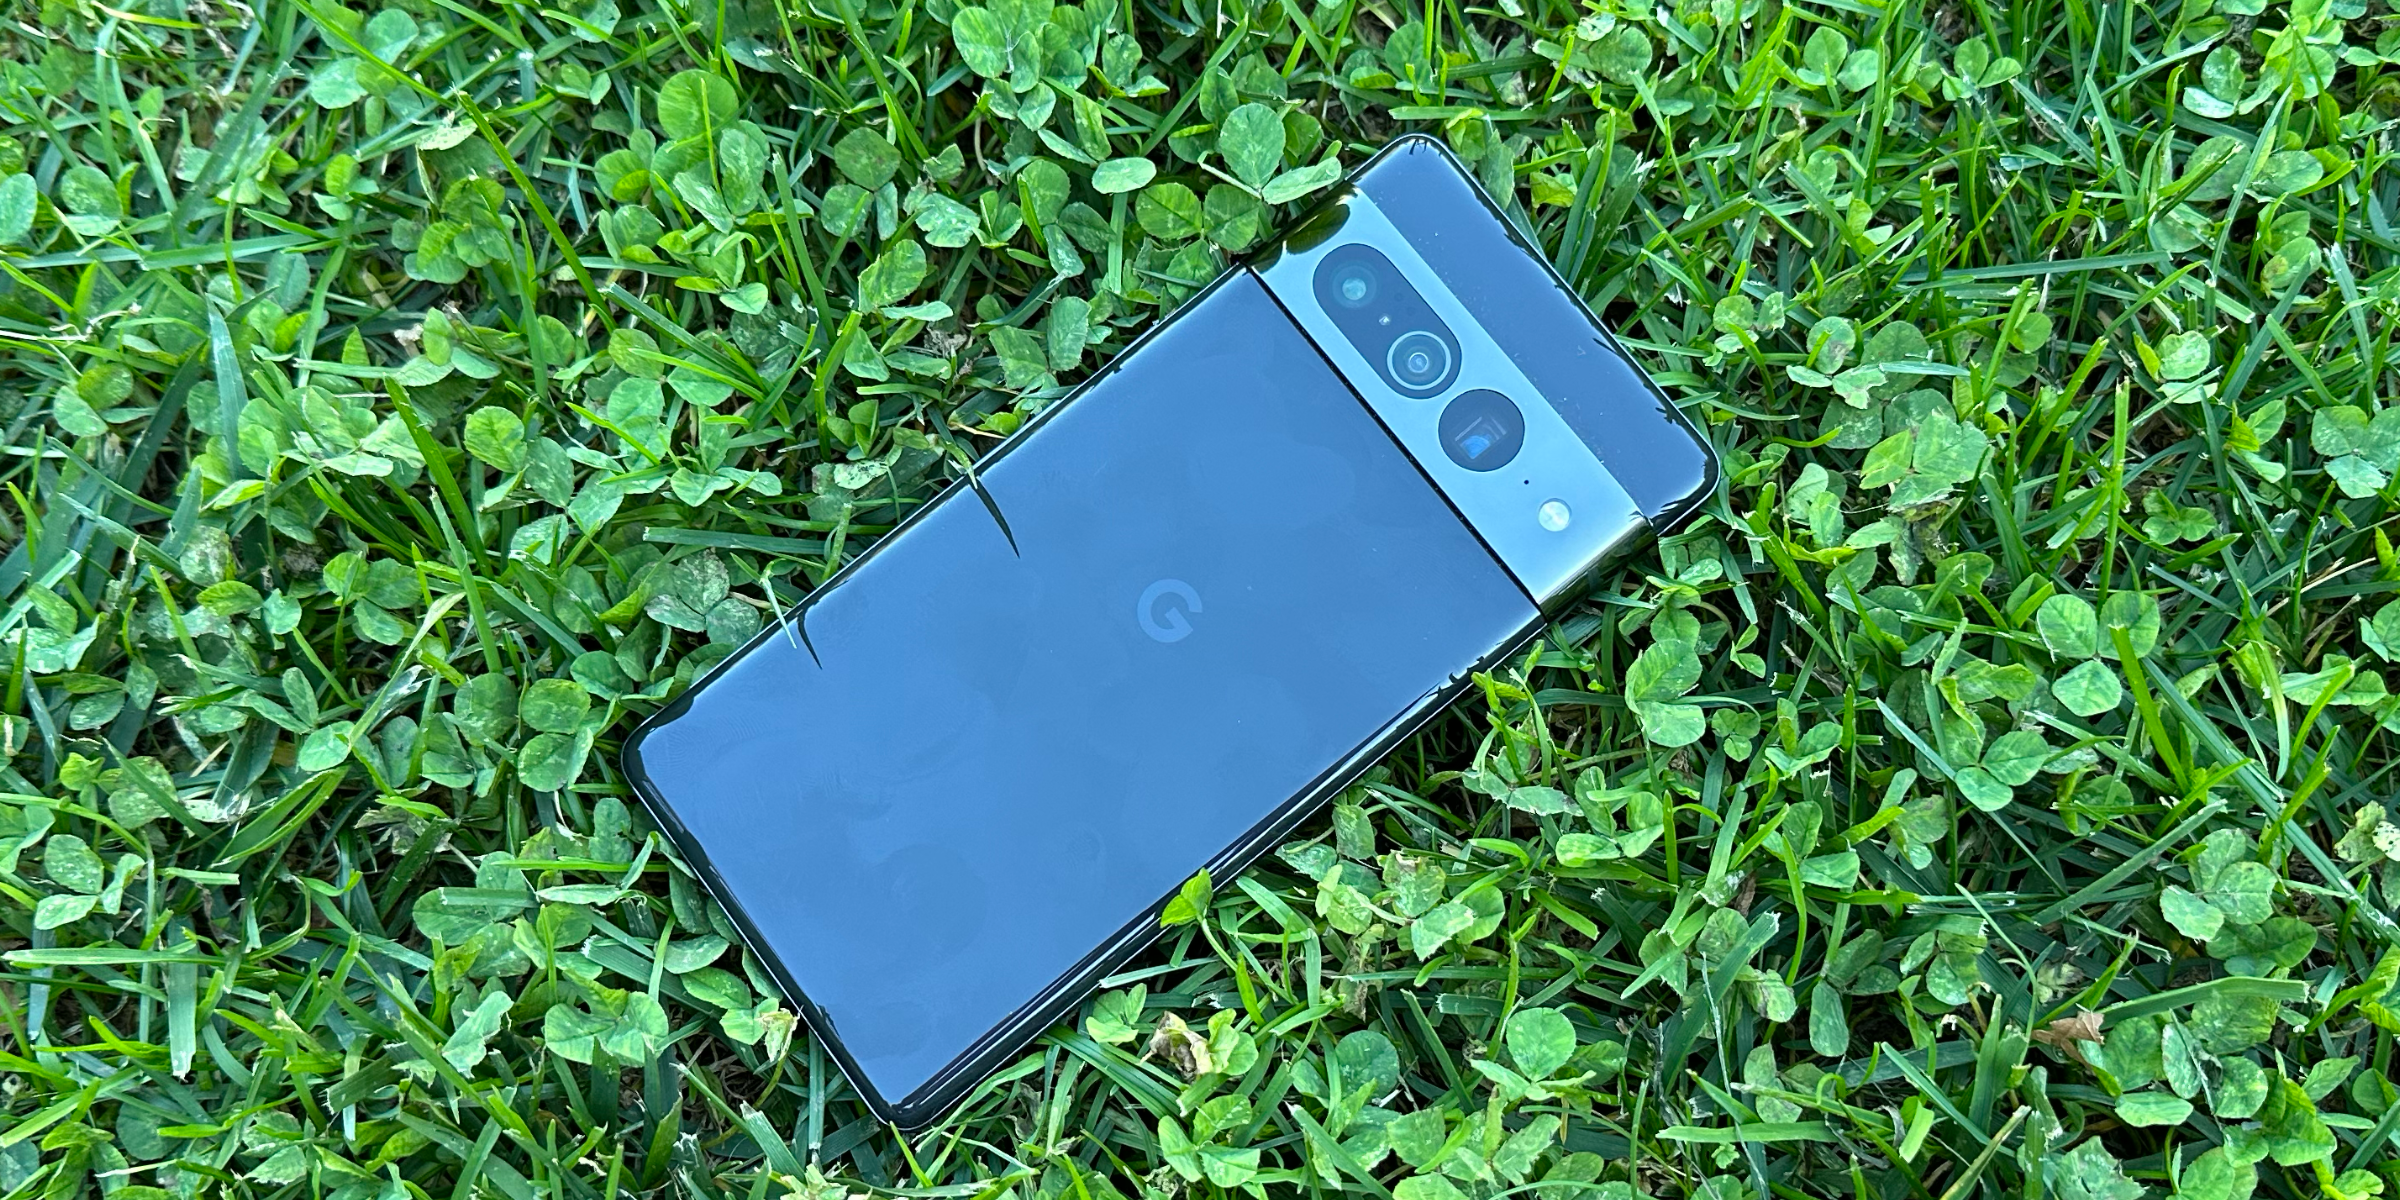 Pixel 7 Pro on a grass background.